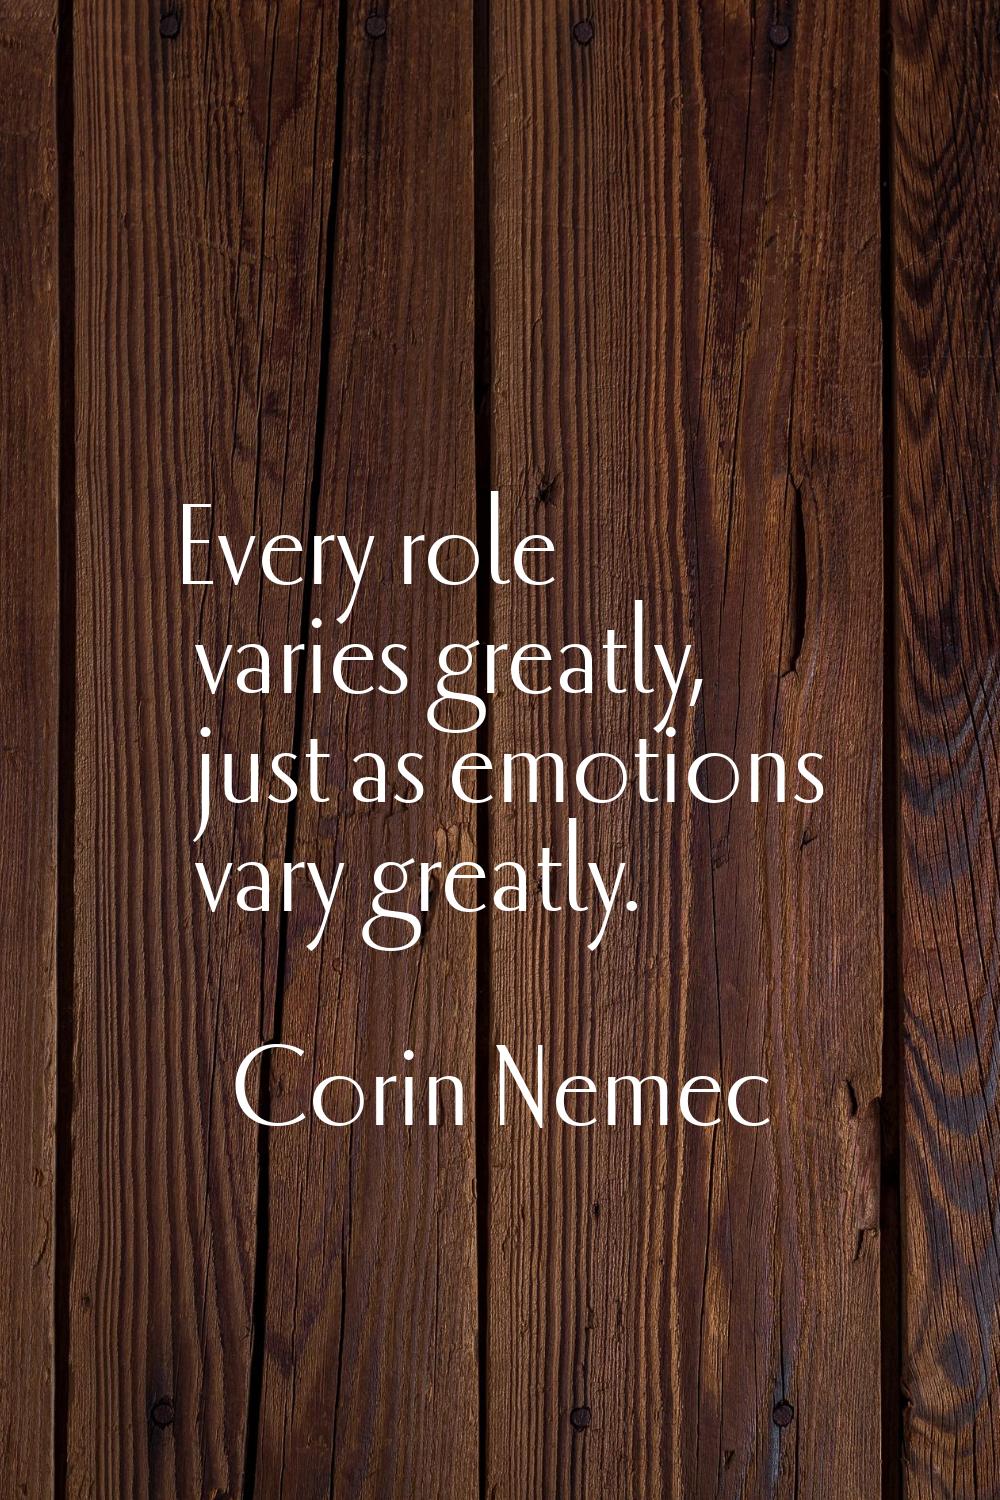 Every role varies greatly, just as emotions vary greatly.